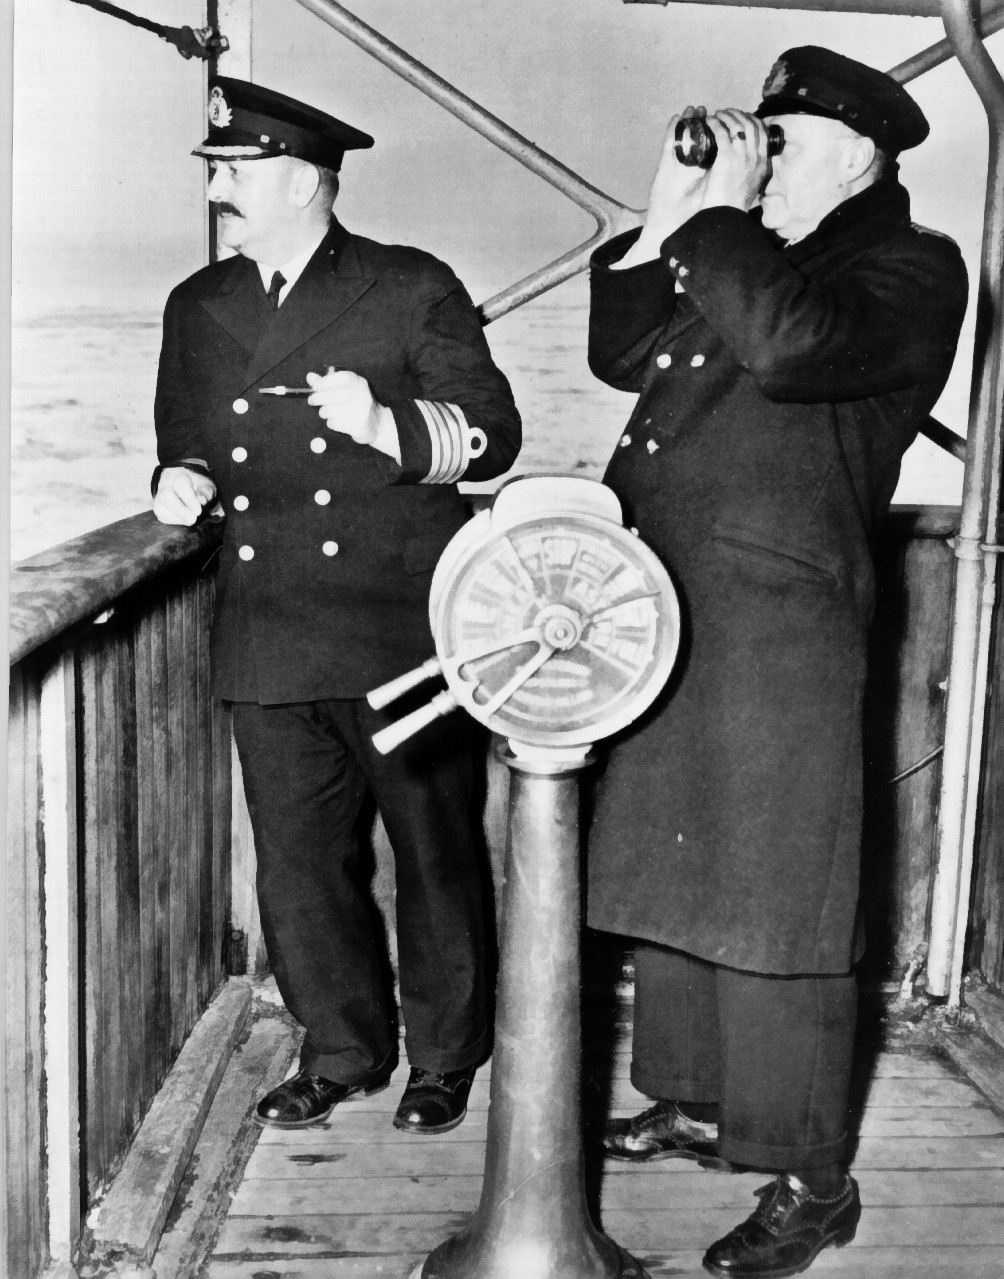 Captain and crewman on bridge of ship